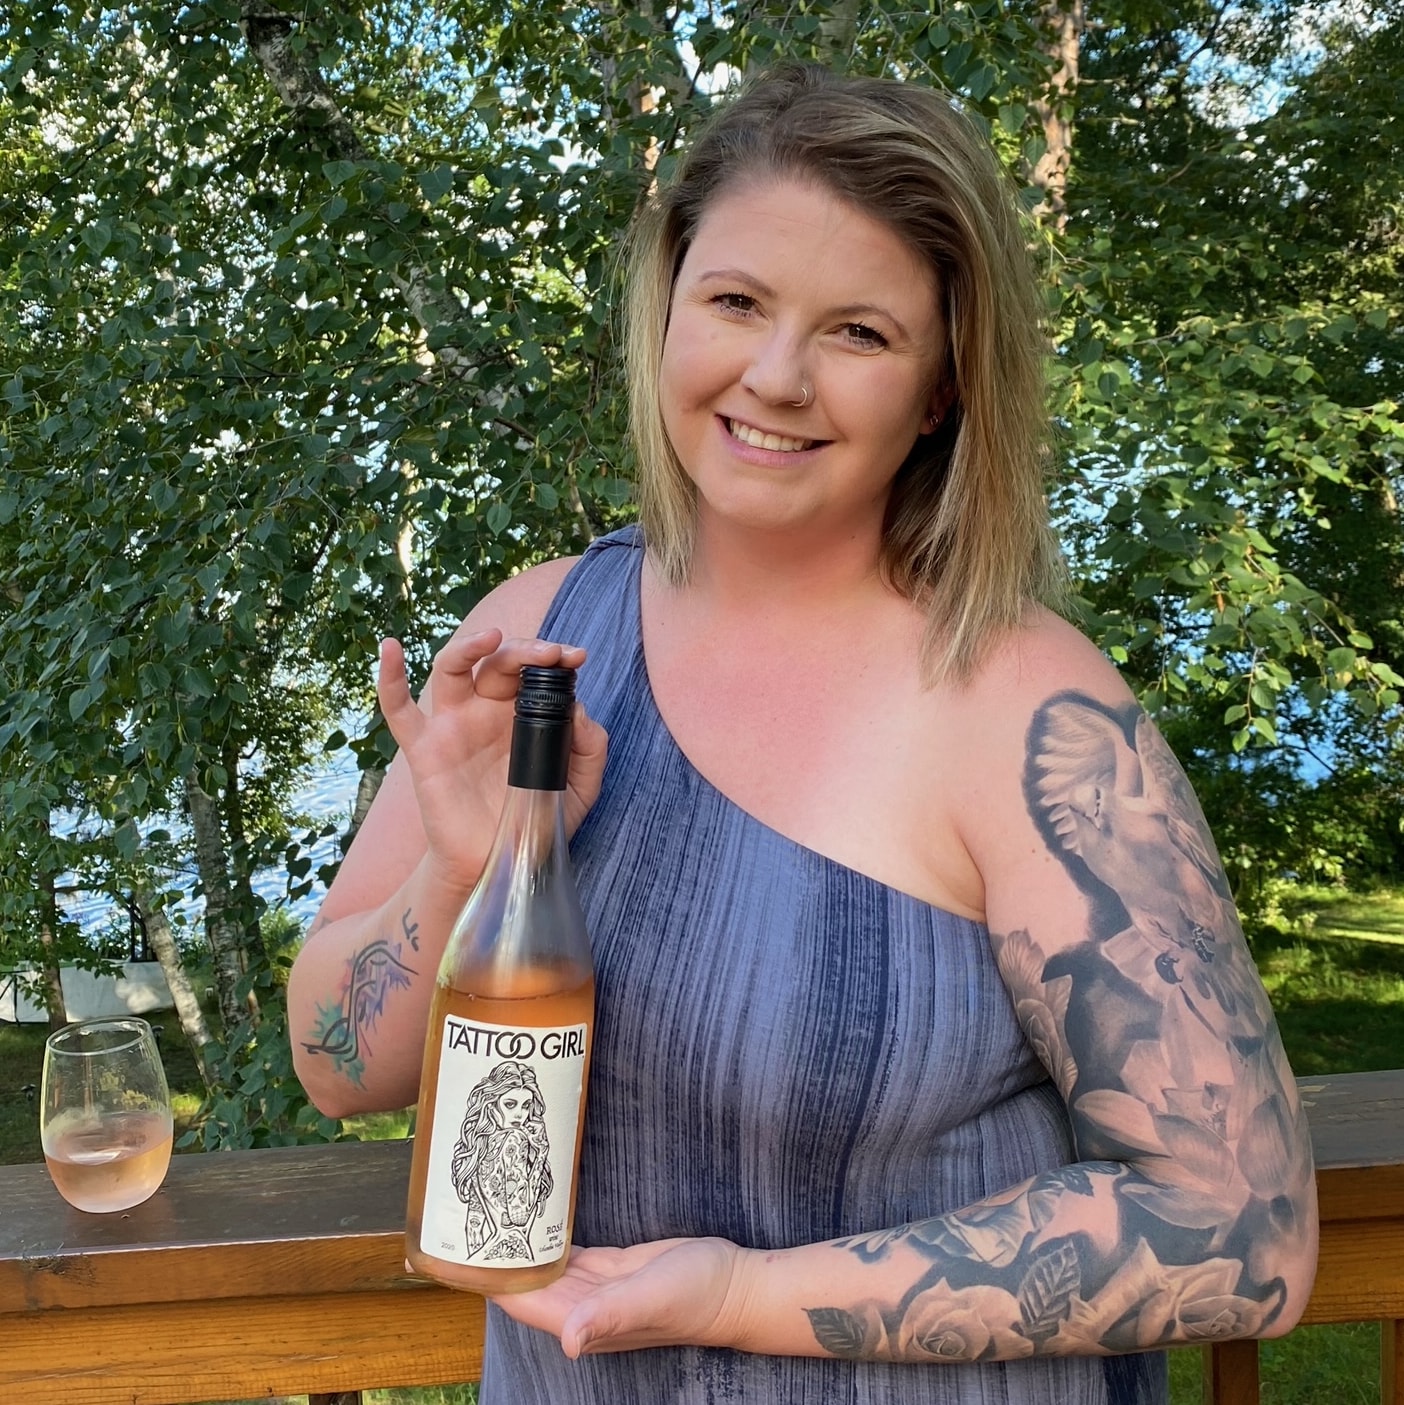 Burrill Street Liquor  Just brought in all varietals of Tattoo Girl by  William Weaver Sampled their Riesling yesterday had to bring that in  along with everything else they make Delicious wines